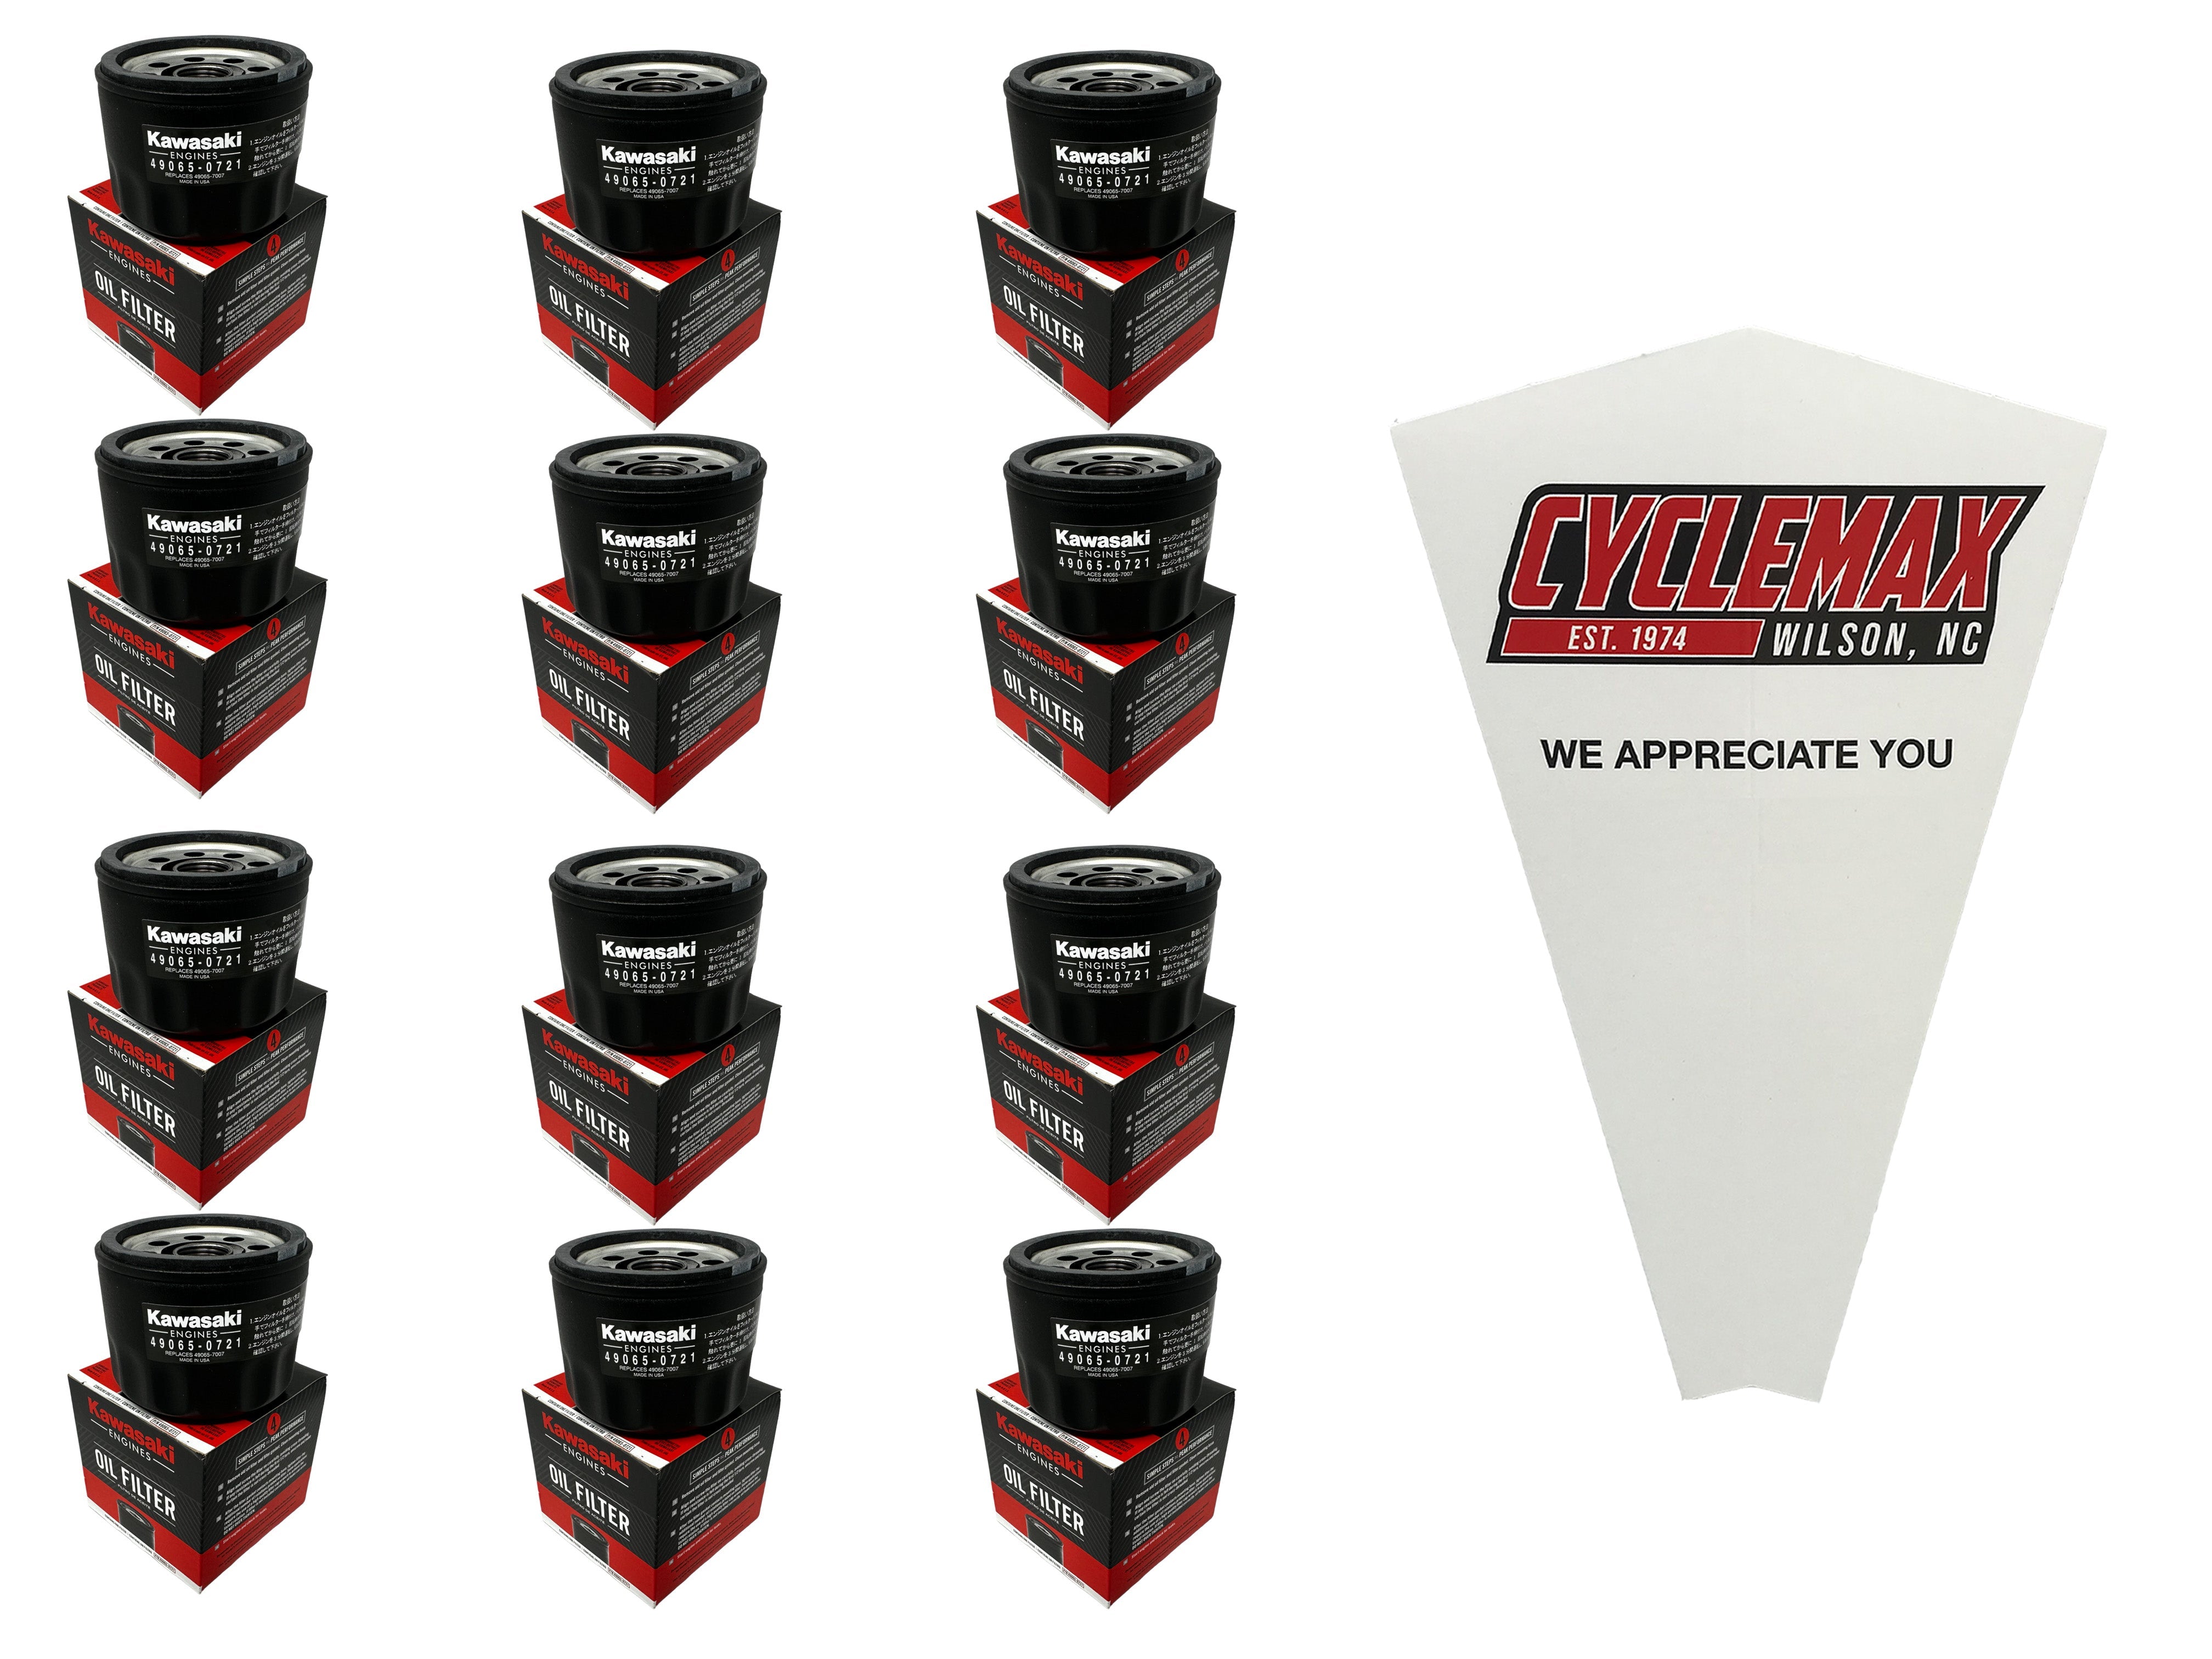 Cyclemax Twelve Pack for Kawasaki Oil Filter 49065-0721 Contains Twelve Filters and a Funnel